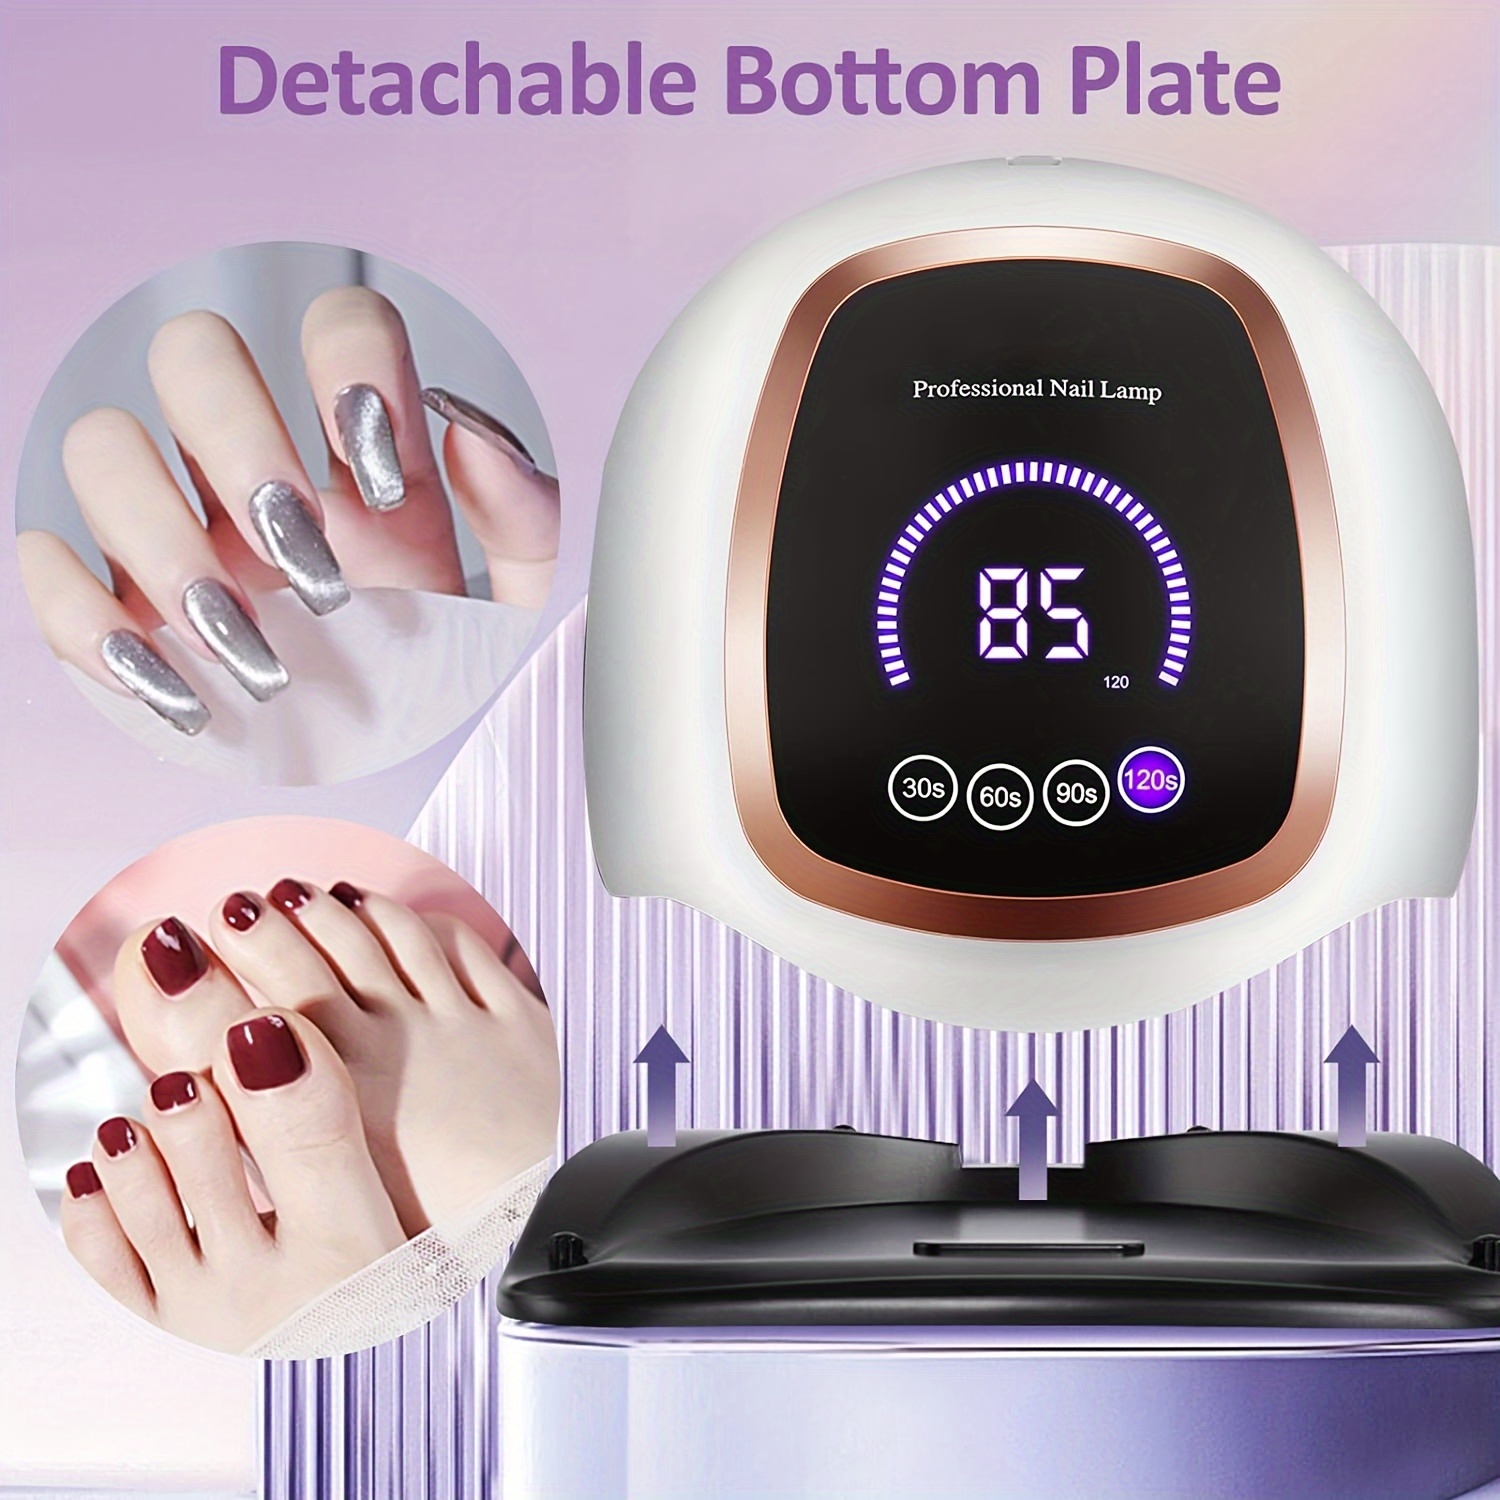 

Uv Led Nail Lamp, Nail Dryer For Lcd Display, Auto Sensor And 4 Timer Settings, Professional Curing Strip 42 Beads For Salon And Home